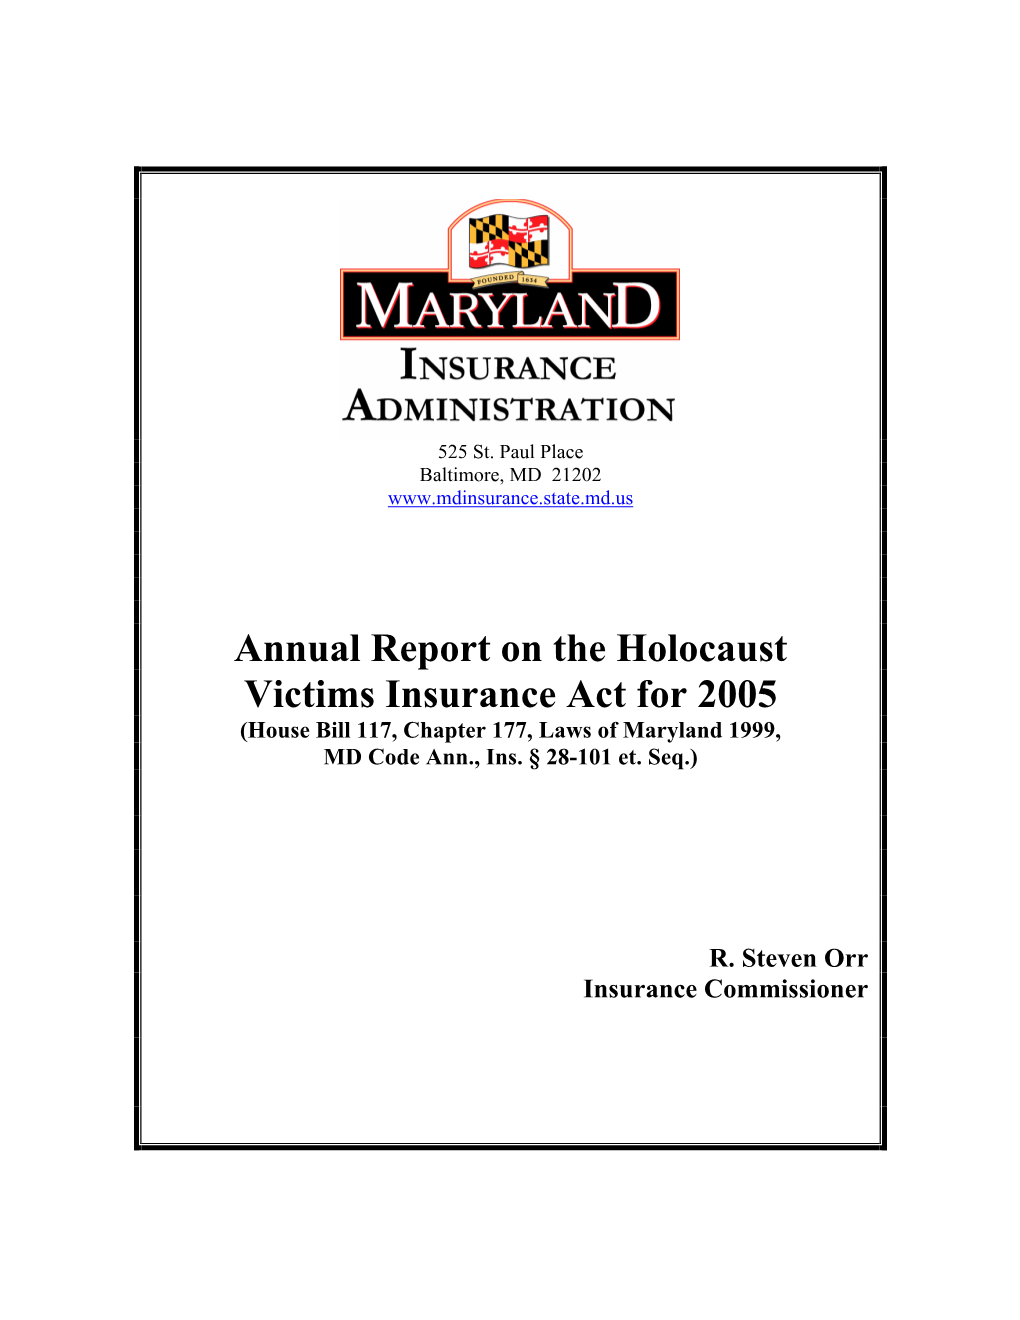 Annual Report on the Holocaust Victims Insurance Act for 2005 (House Bill 117, Chapter 177, Laws of Maryland 1999, MD Code Ann., Ins